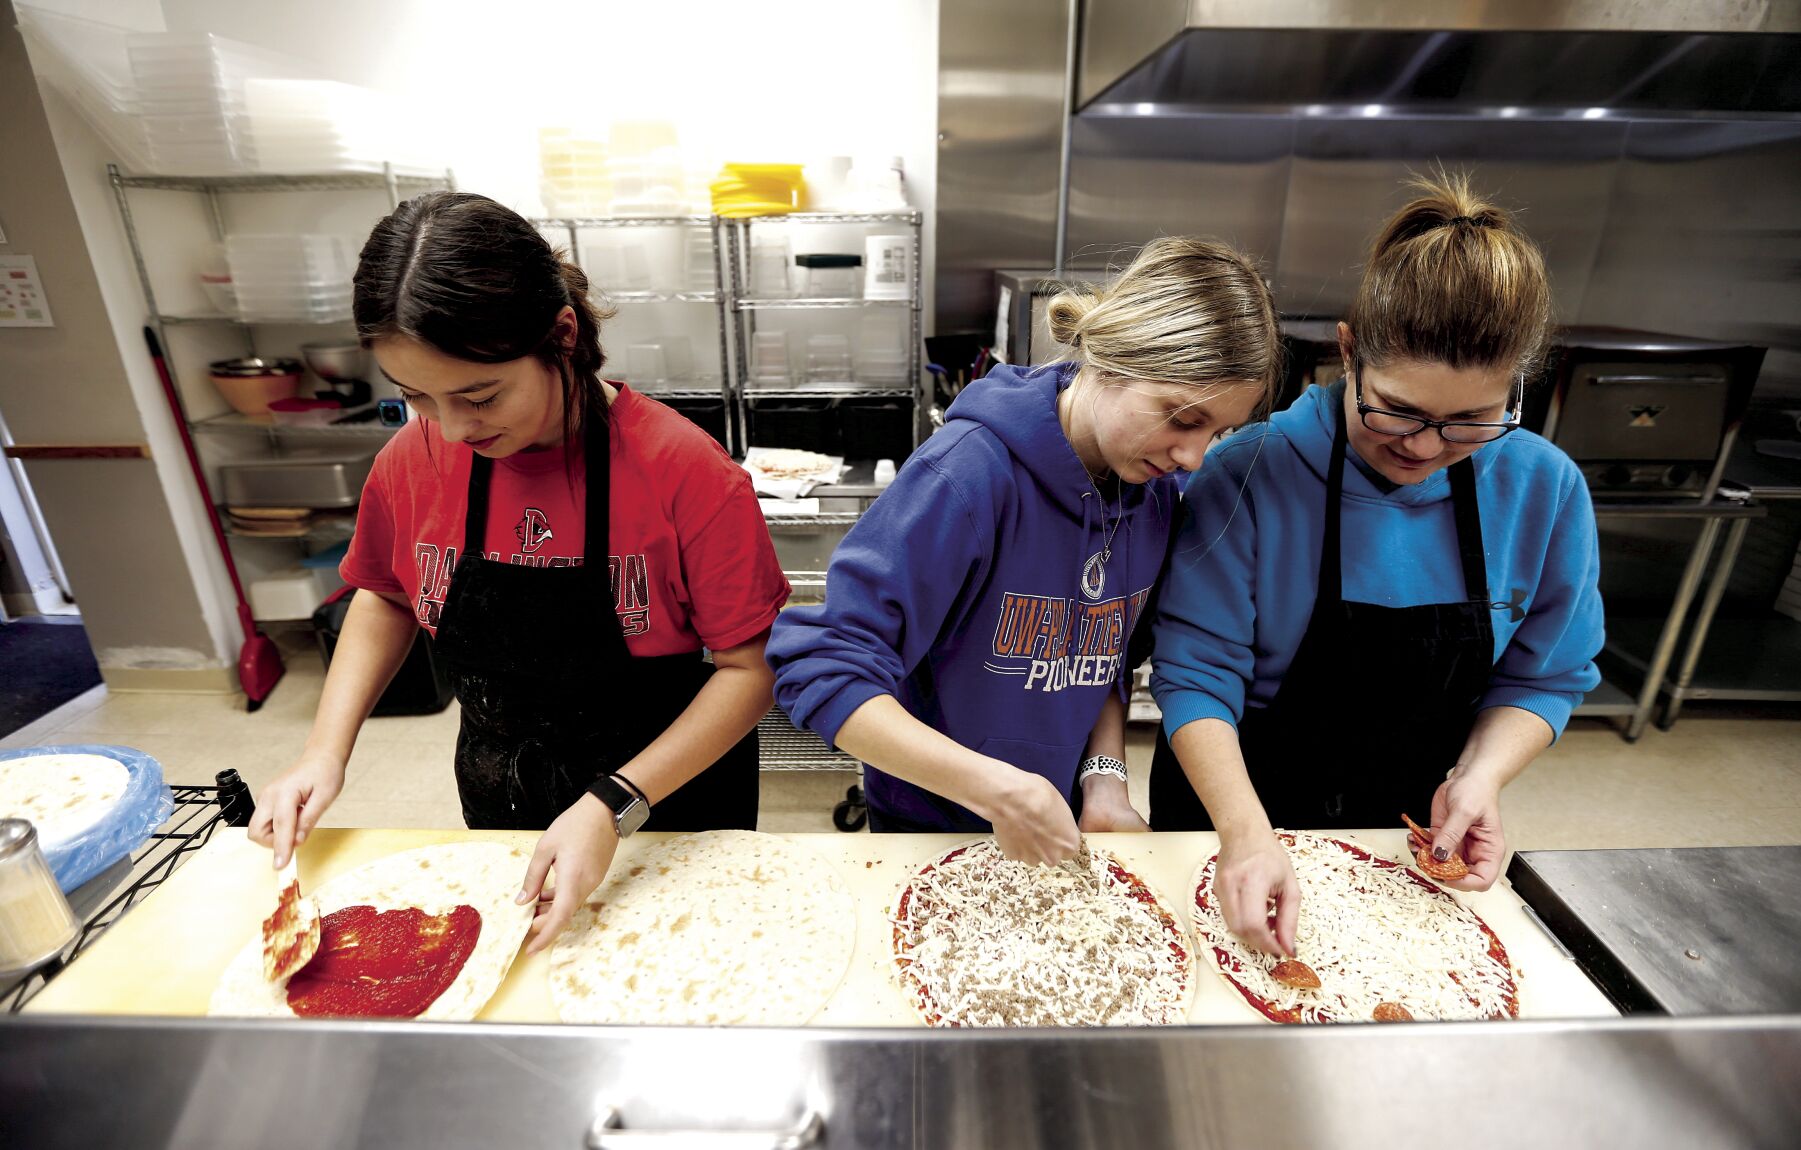 Alexis Mosley (left), 16, works with Ava Smith and her mother, co-owner Val Smith, on making pizzas at Vinger’s Pizza in Darlington, Wis., before opening on Saturday.    PHOTO CREDIT: Dave Kettering